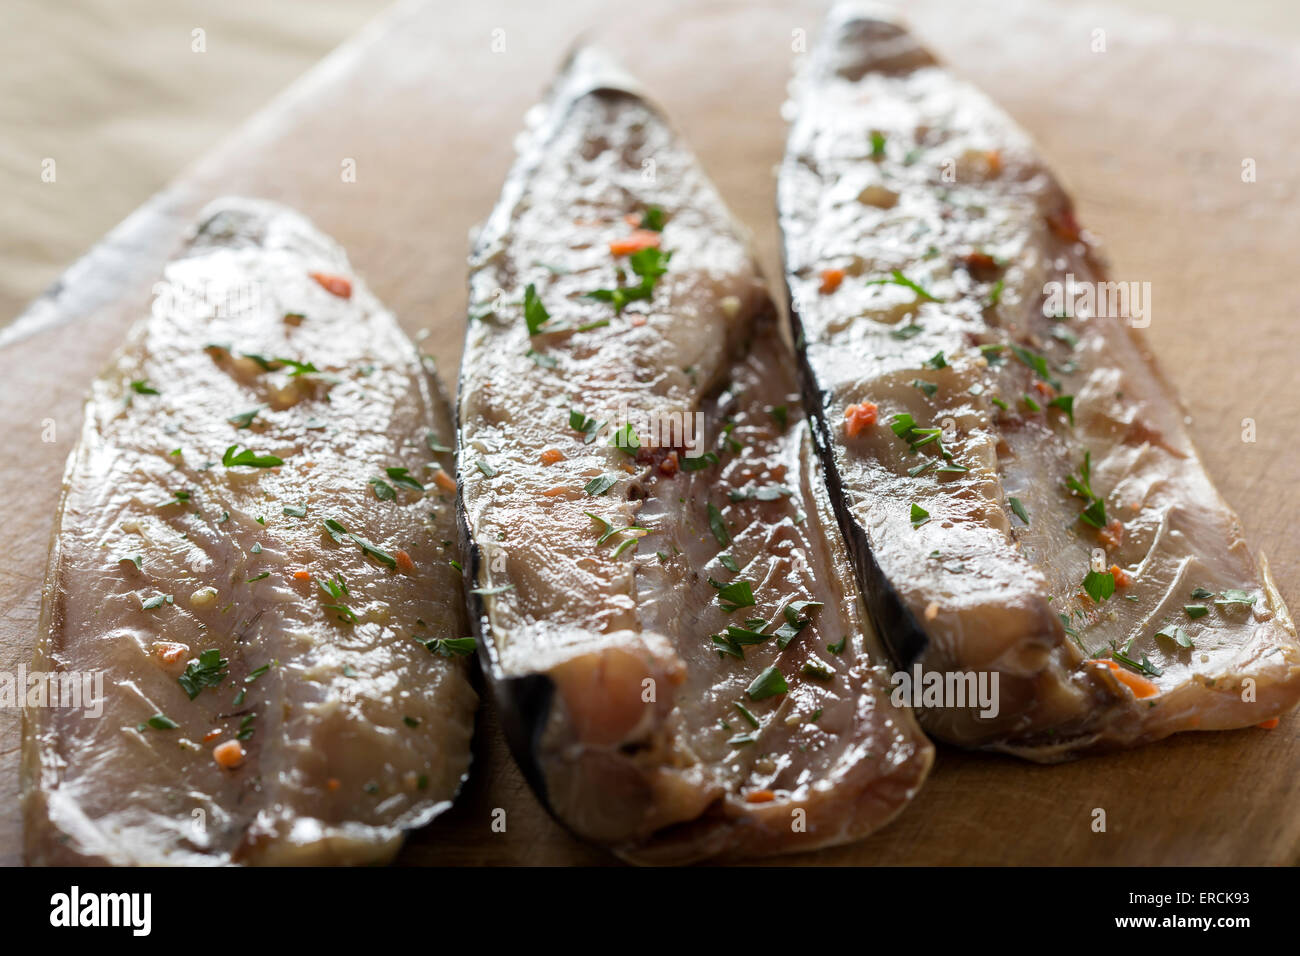 Raw mackerel is prepared for cooking with vegetables Stock Photo